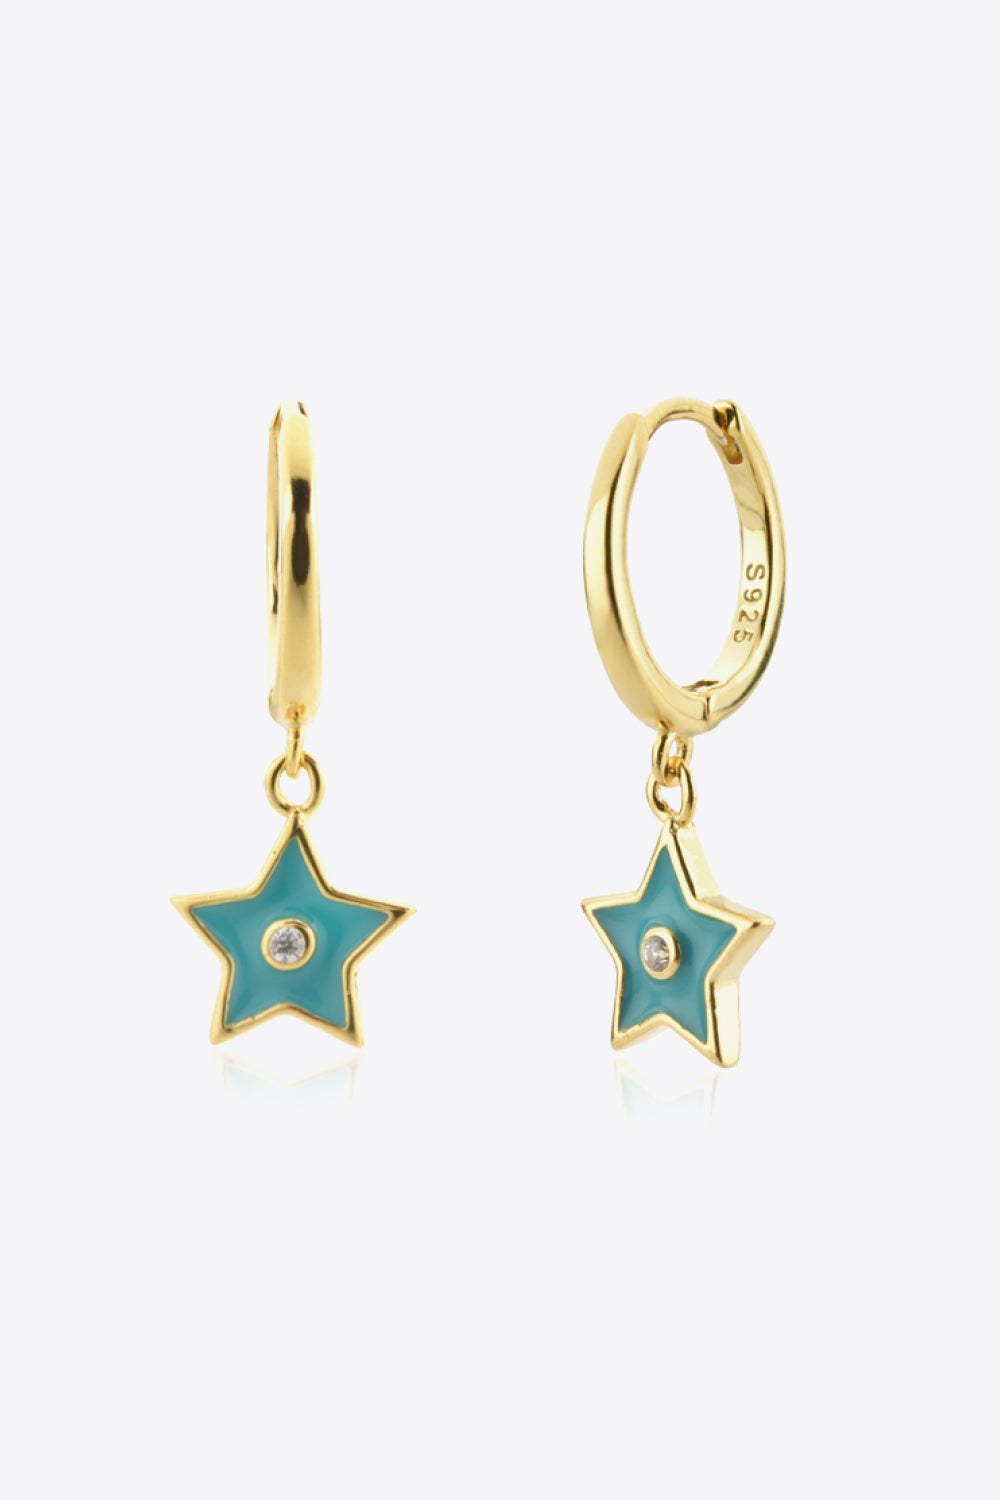 You Are a Shining Star Earrings